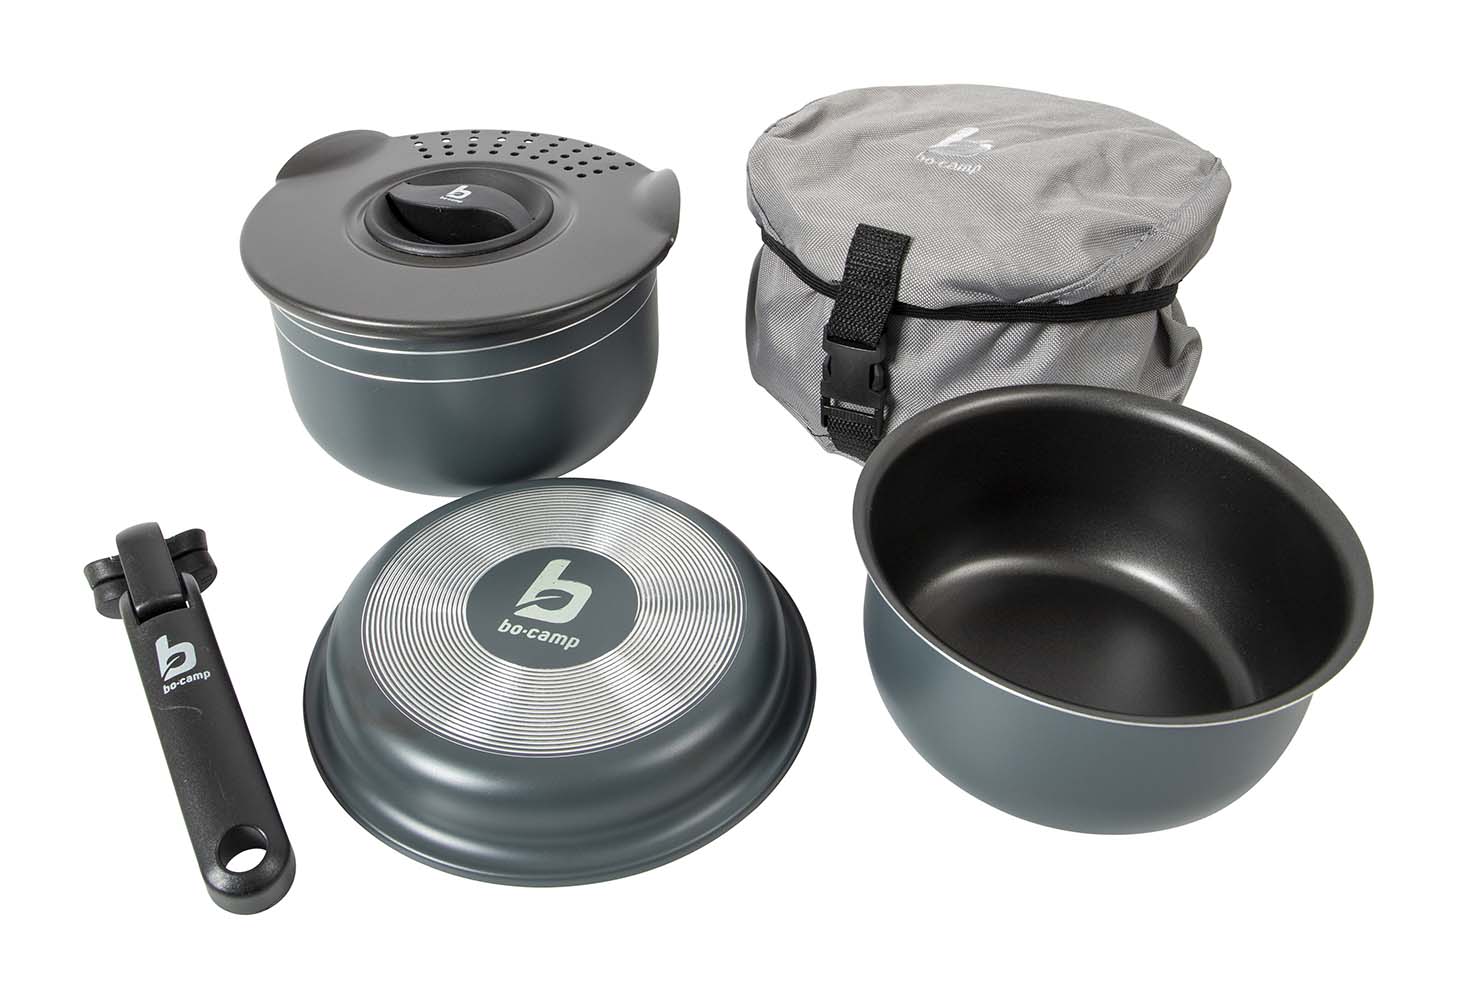 2300351 A stylish and extremely compact 5 part cookware set. This complete lightweight set consists of 2 saucepans, 1 frying pans, a draining lid and pot handle. These pans have a powder coating outside and a non-stick coating on the inside. Can be used on gas, ceramic and electrical heat sources. All parts are stored very compact in the luxury protective case. Dimensions of cooking pans (Øxh): 16x9 and 14x7 cm. Dimensions of cooking pan (Øxh): 16x3 cm. Dimensions nested (Øxh): 18x11 cm. Contents: 1.1 and 1.7 litre.